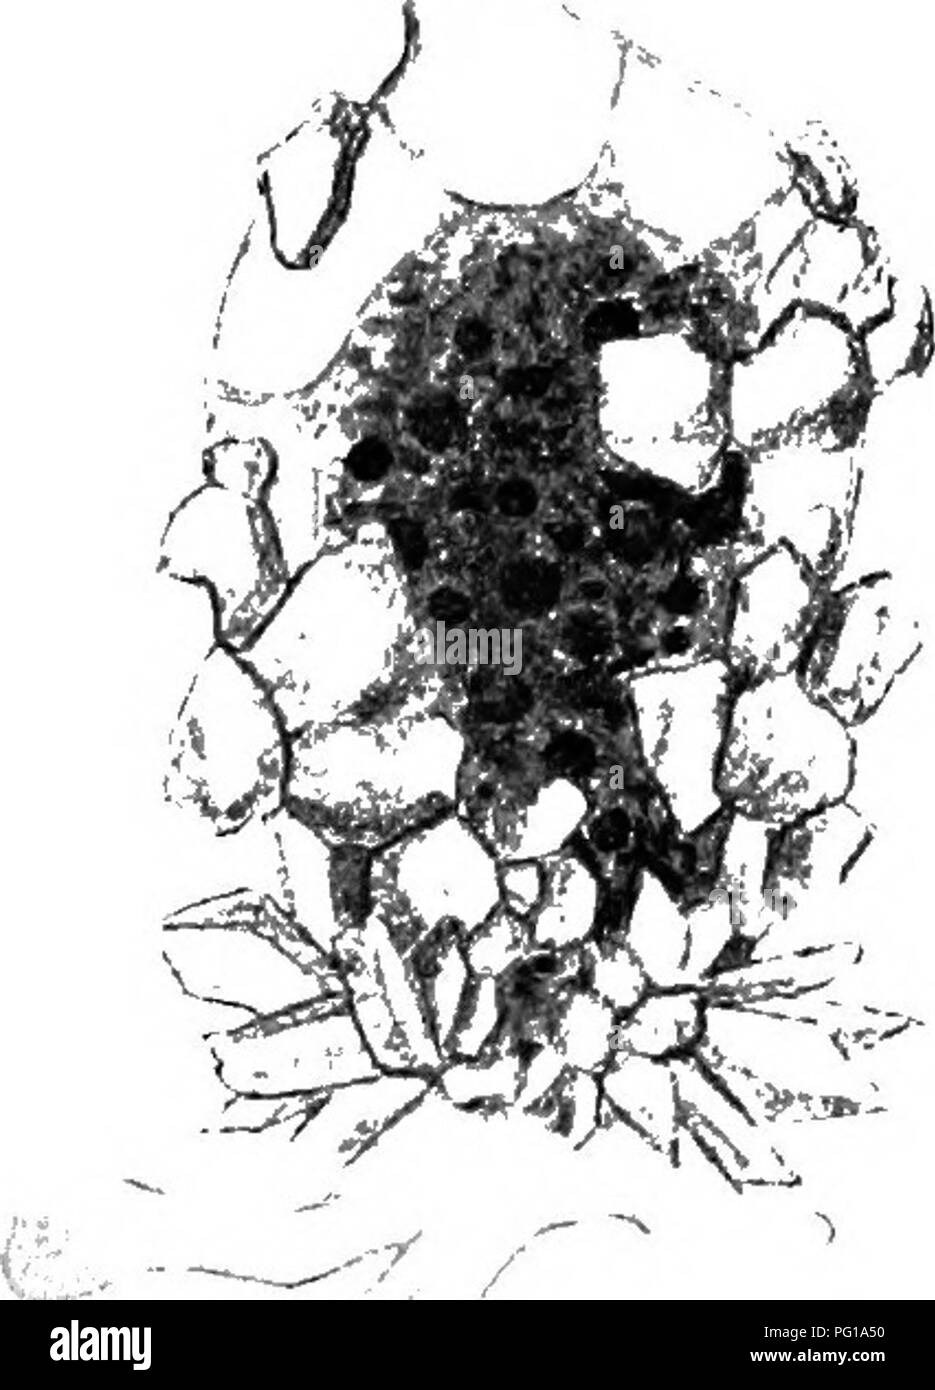 . The British freshwater Rhizopoda and Heliozoa. Rhizopoda; Heliozoa; Freshwater animals. FiCiS. iG AT&gt;iT&gt; 47.—Difflugia hacillariarum. After Gr. S. West (as D. acuminata ya,T. elegans). Fig. 46 from Wioken Fen, Cambs. x 340. Fig-. 47 from Llyn-y-cwm-ffynon, N. Wales, x 520. from .the figures (we have had no opportunity of examining the actual tests), this and Penard's D. elegans var. teres (' Sarc. des grands Lacs' [1905] p. 16) seem to be identical. No example which could safely be referred to either of these forms has yet been met with in Britain. They would rank under this classifica Stock Photo